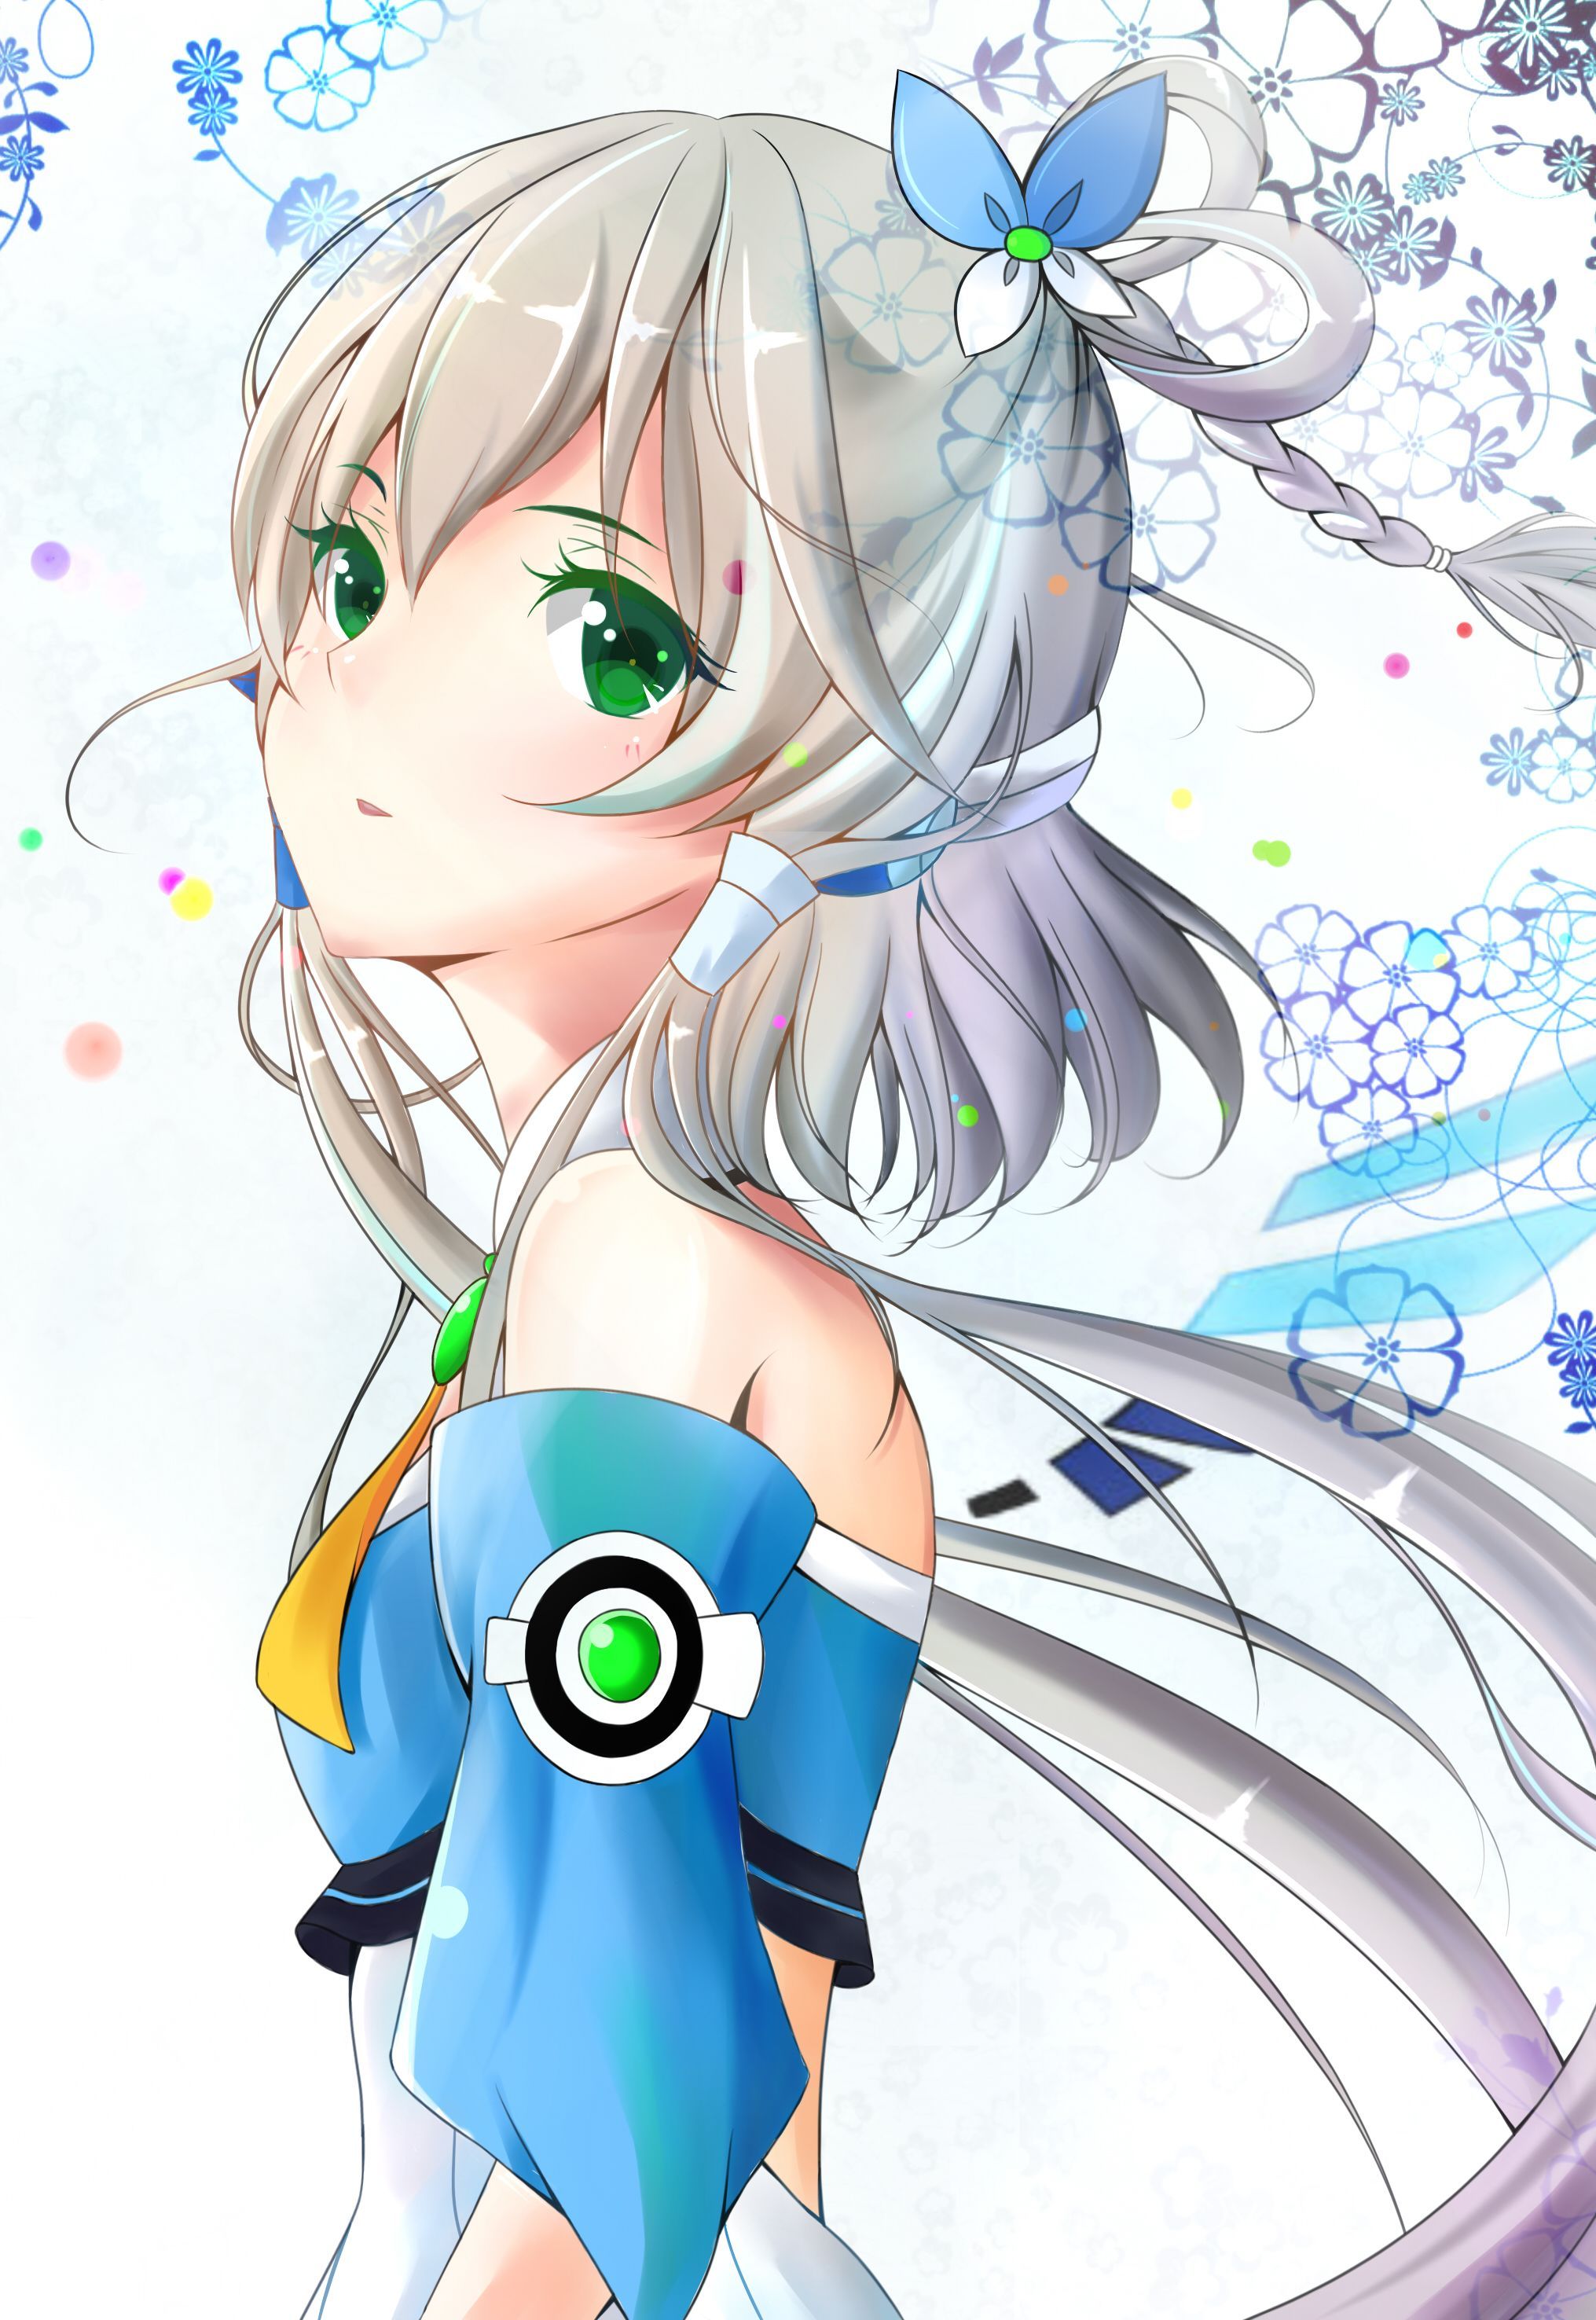 Best Luo Tianyi image. Vocaloid, Anime, Art